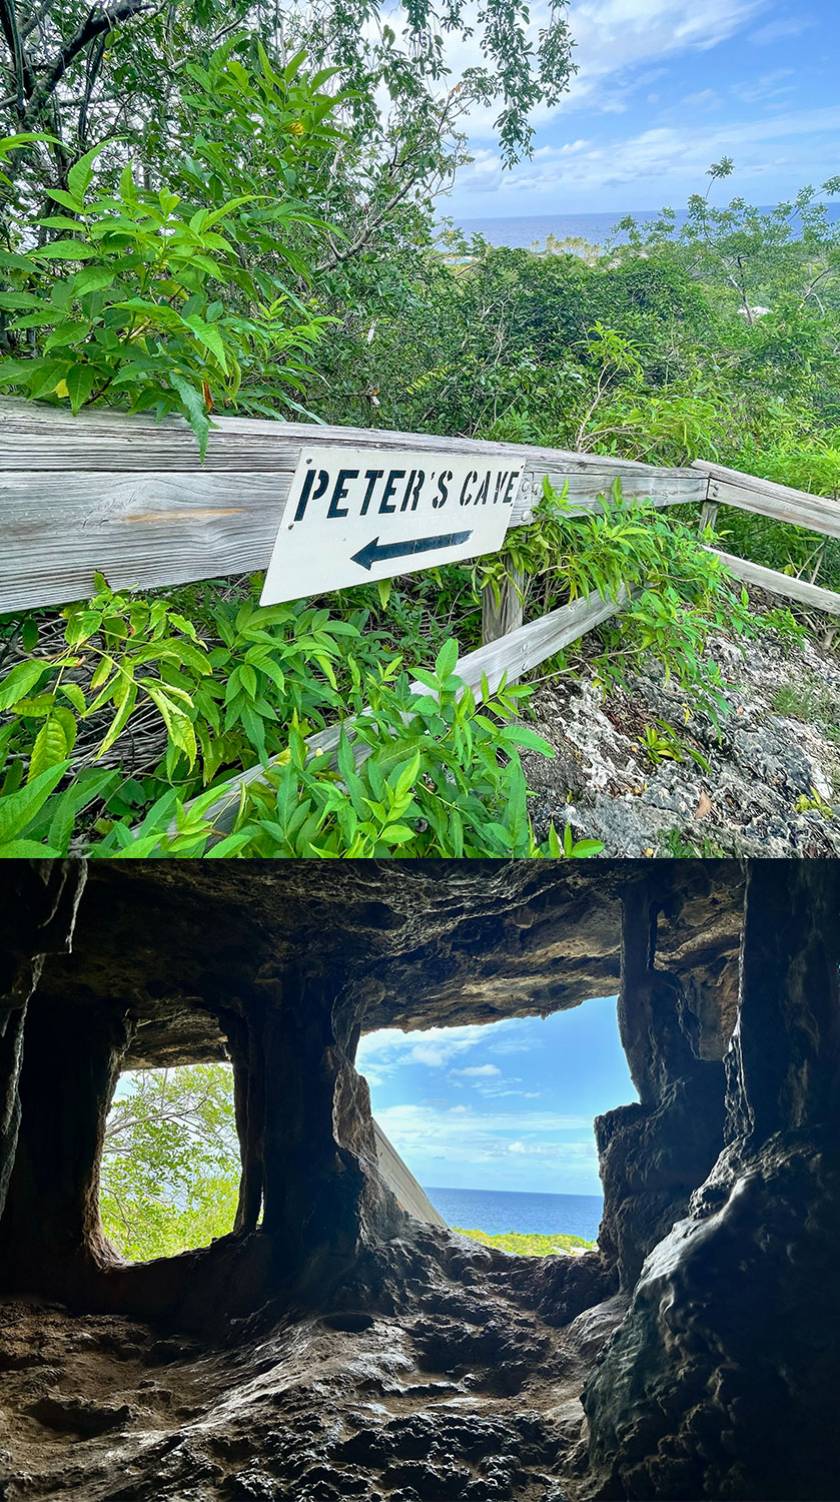 Peter's Cave signage and view from inside